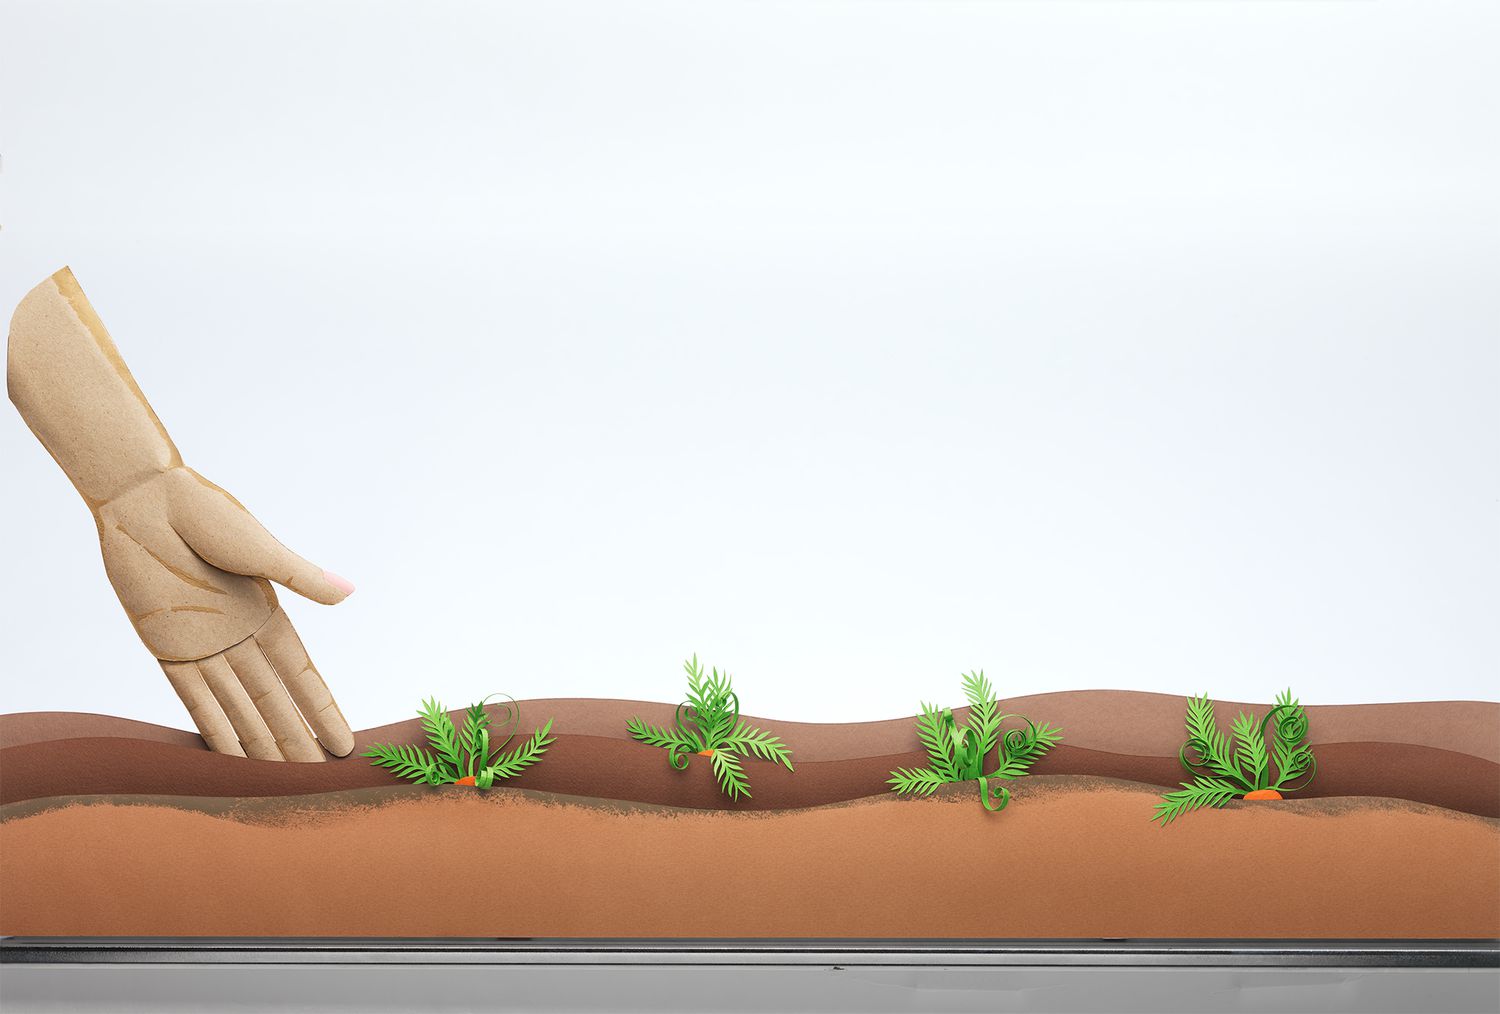 An illustration of a hand reaching into dirt with plants